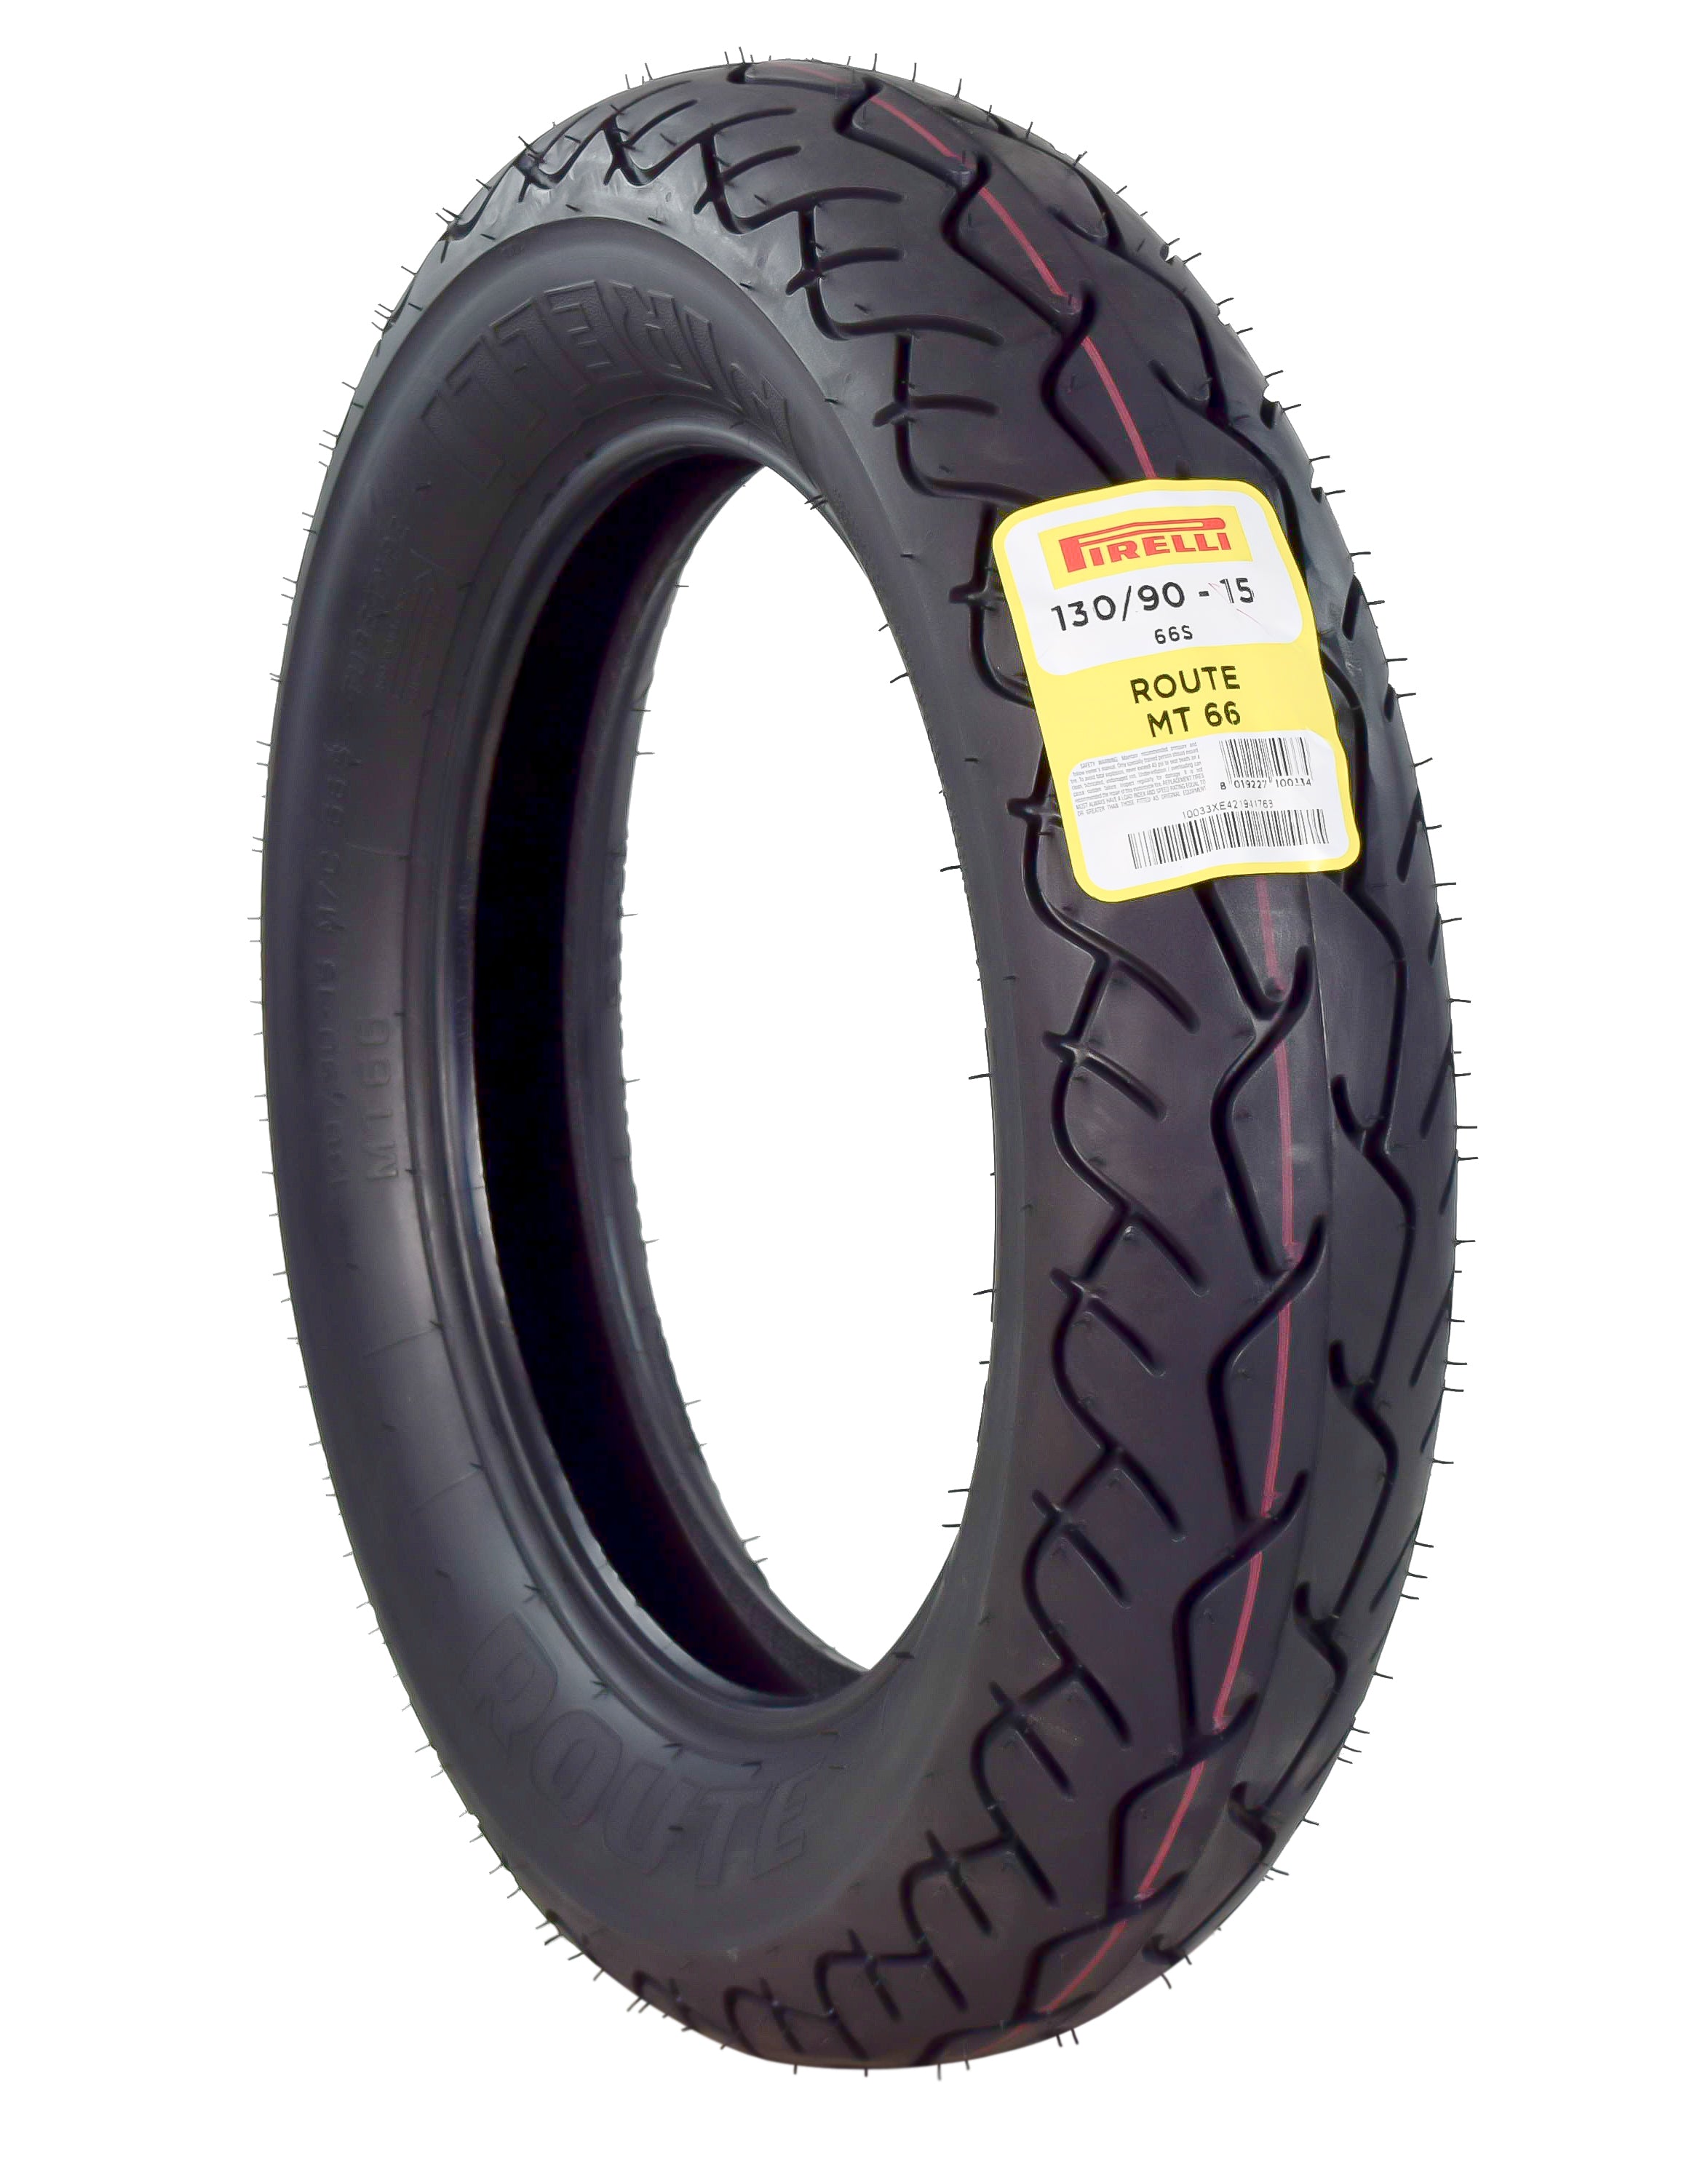 Pirelli-MT-66-Route-1003300-130-90-15-M-C-66S-Rear-Motorcycle-Cruiser-Tire-image-1